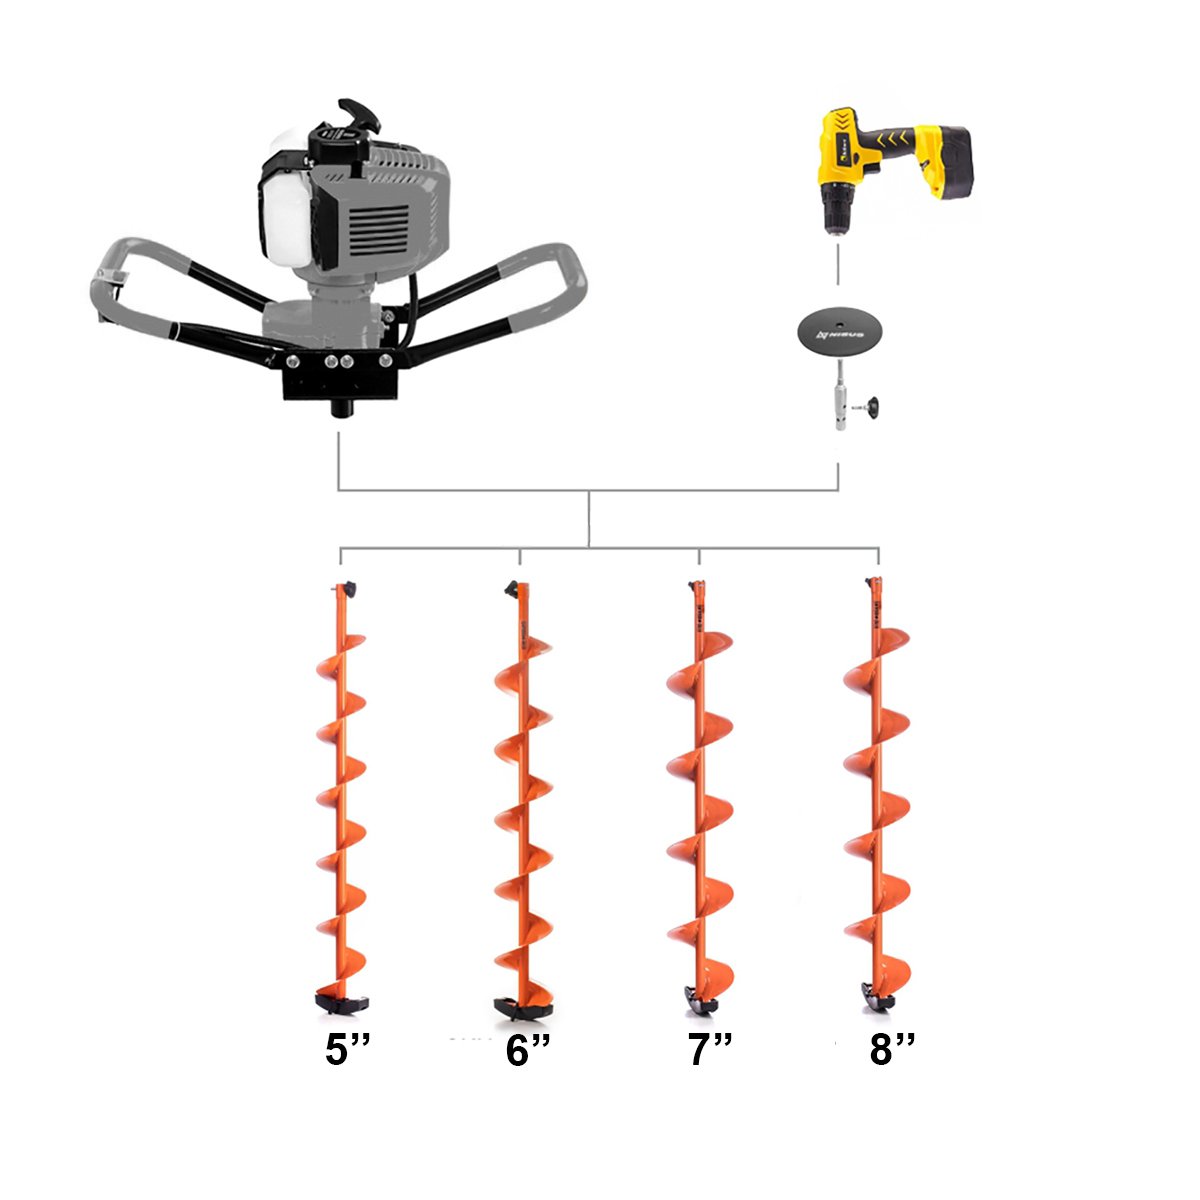 Motoshtorm Ice Auger Bit with a Safety Plate Adapter Kit are available in four sizes and could be used either with a powerhead or with a cordless drill